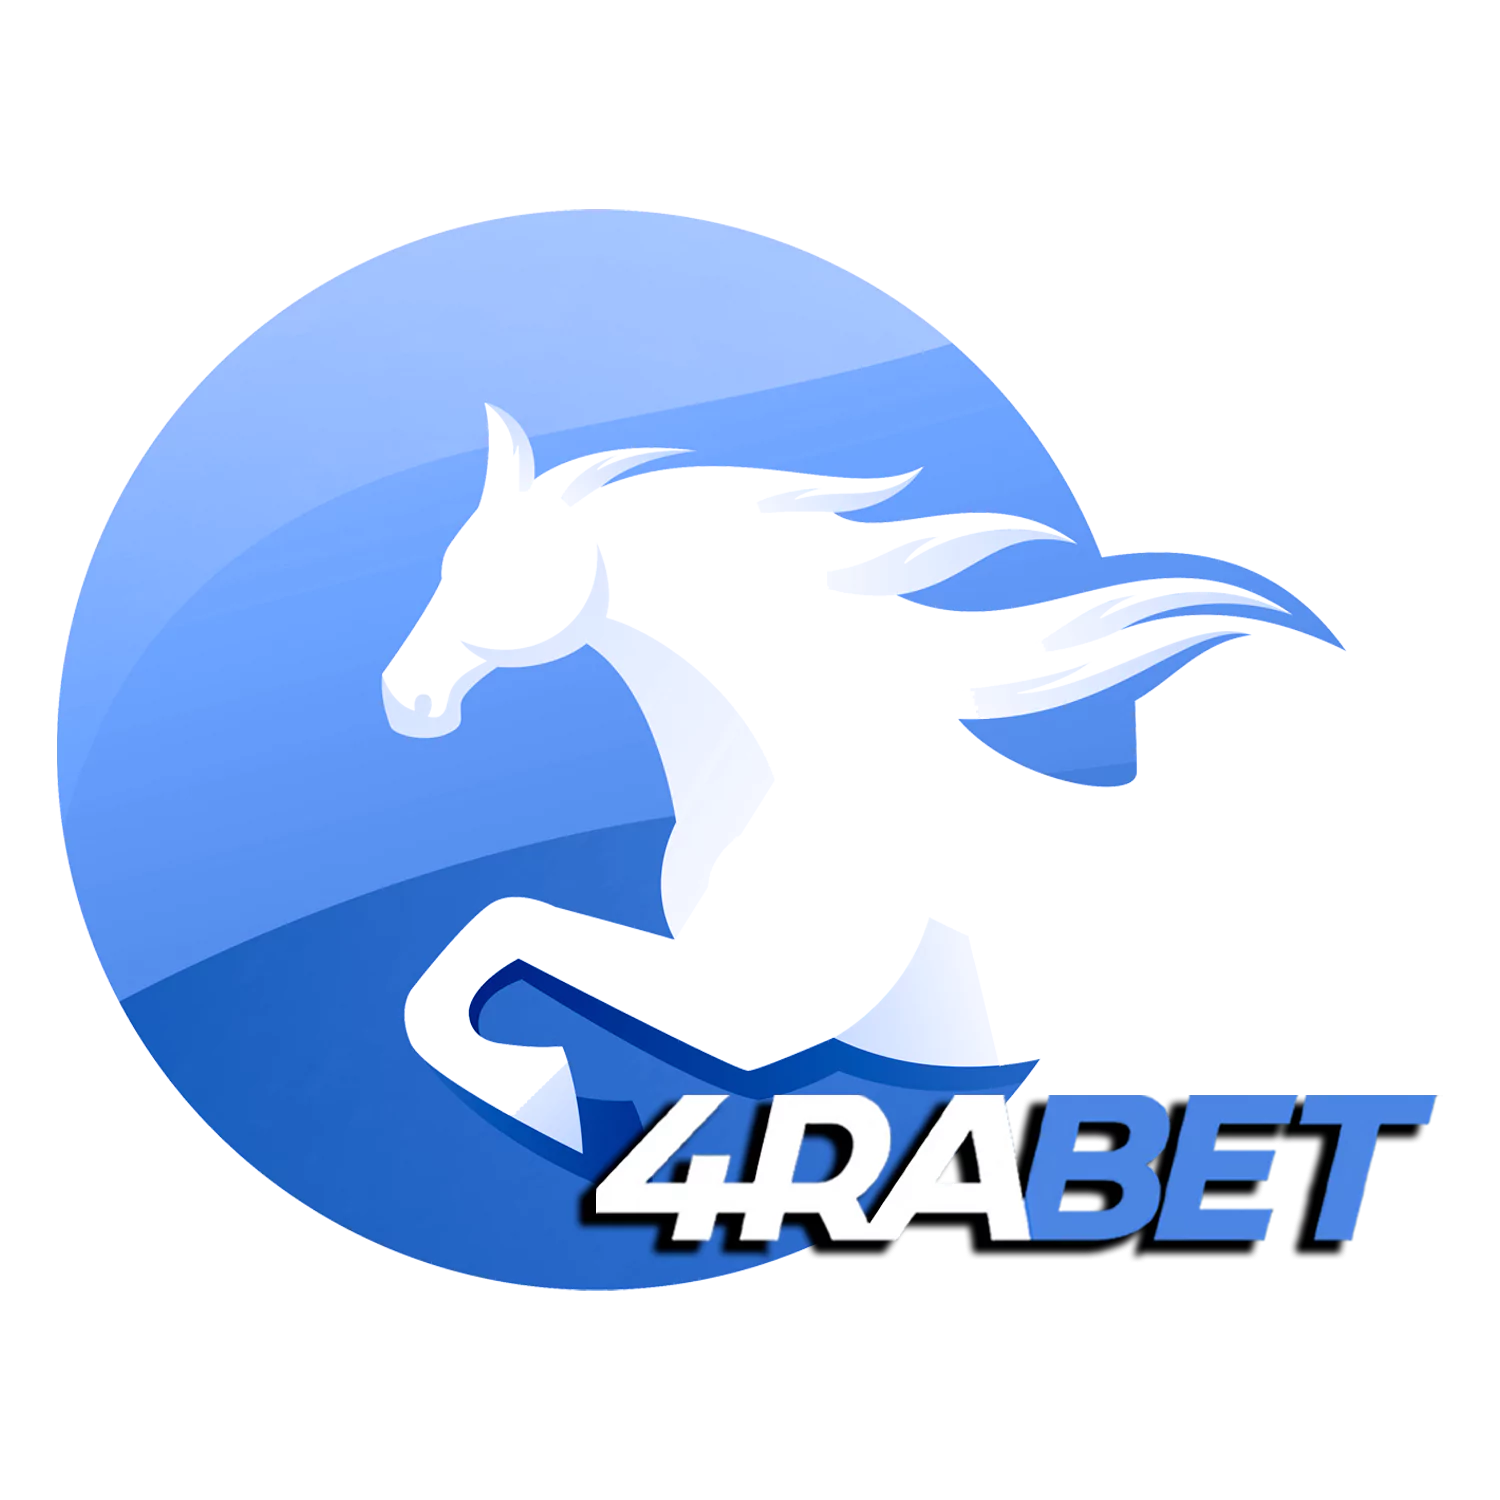 Learn how to bet on Horse Racing at the 4rabet site and in the app.